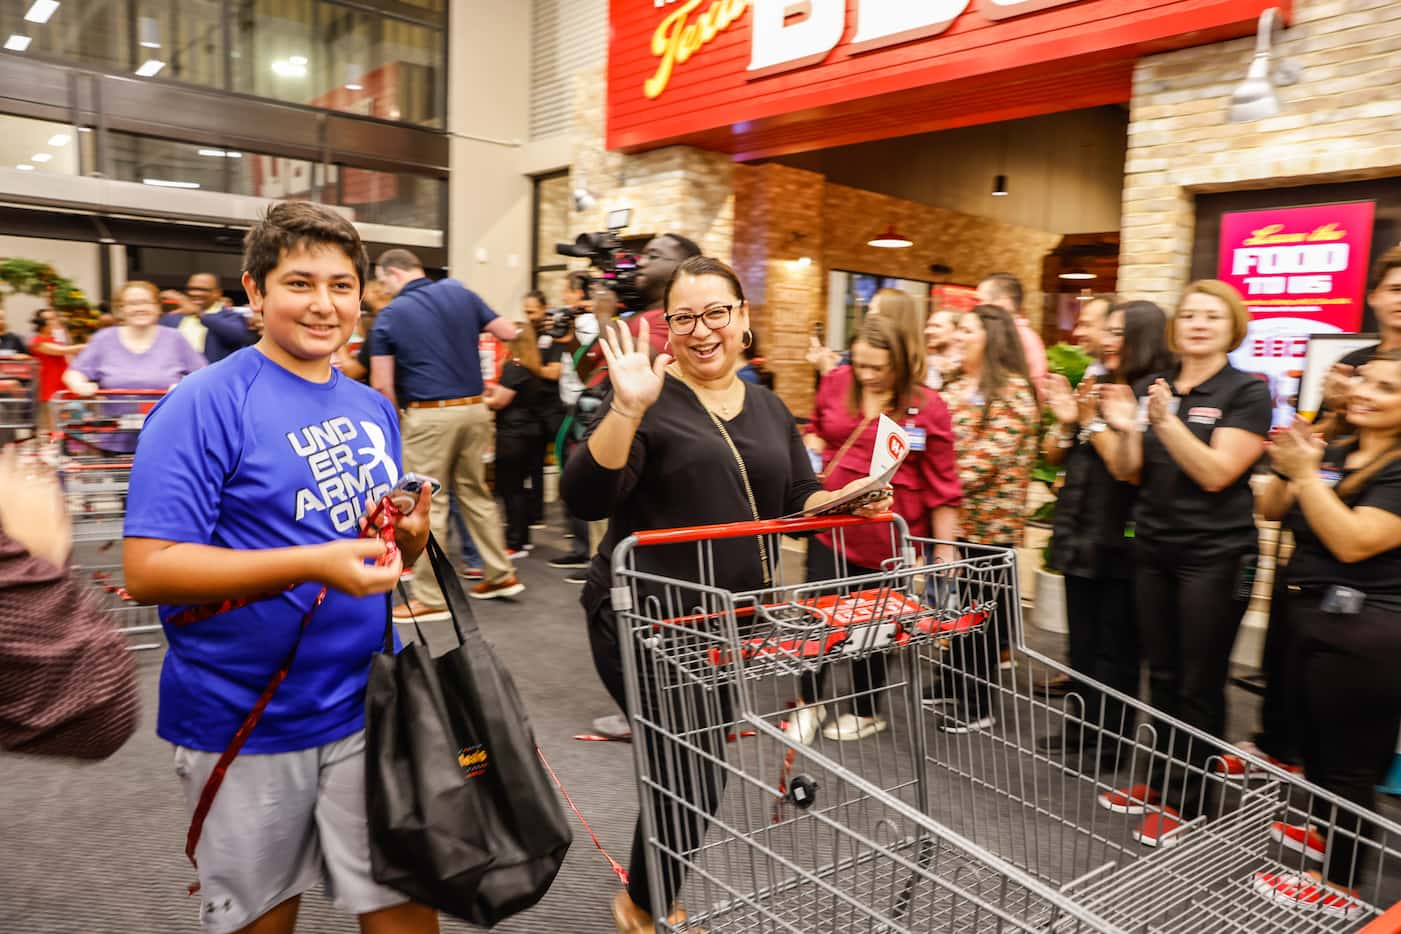 Dante and Claudia Tapia celebrate as they enter the new H-E-B.